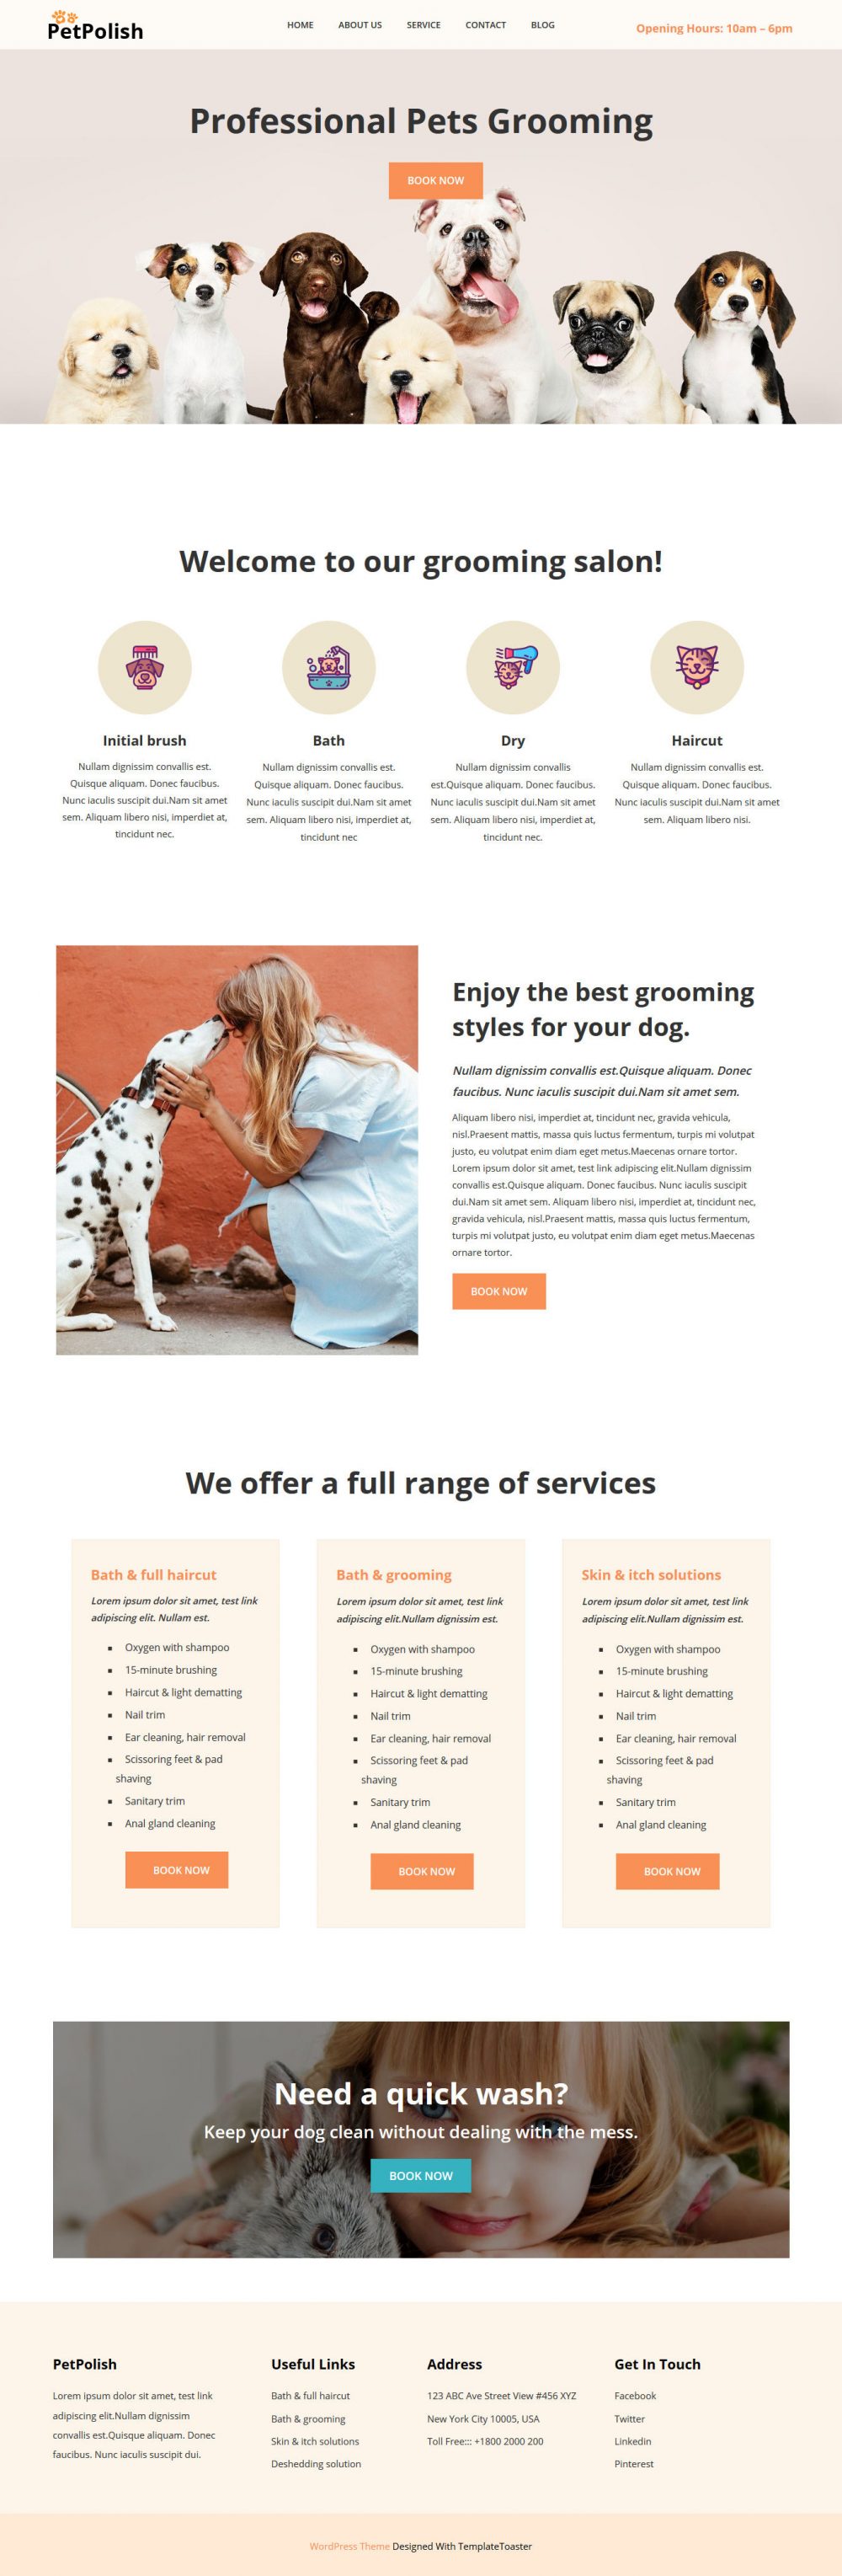 petpolish pet cleaning and care services html template